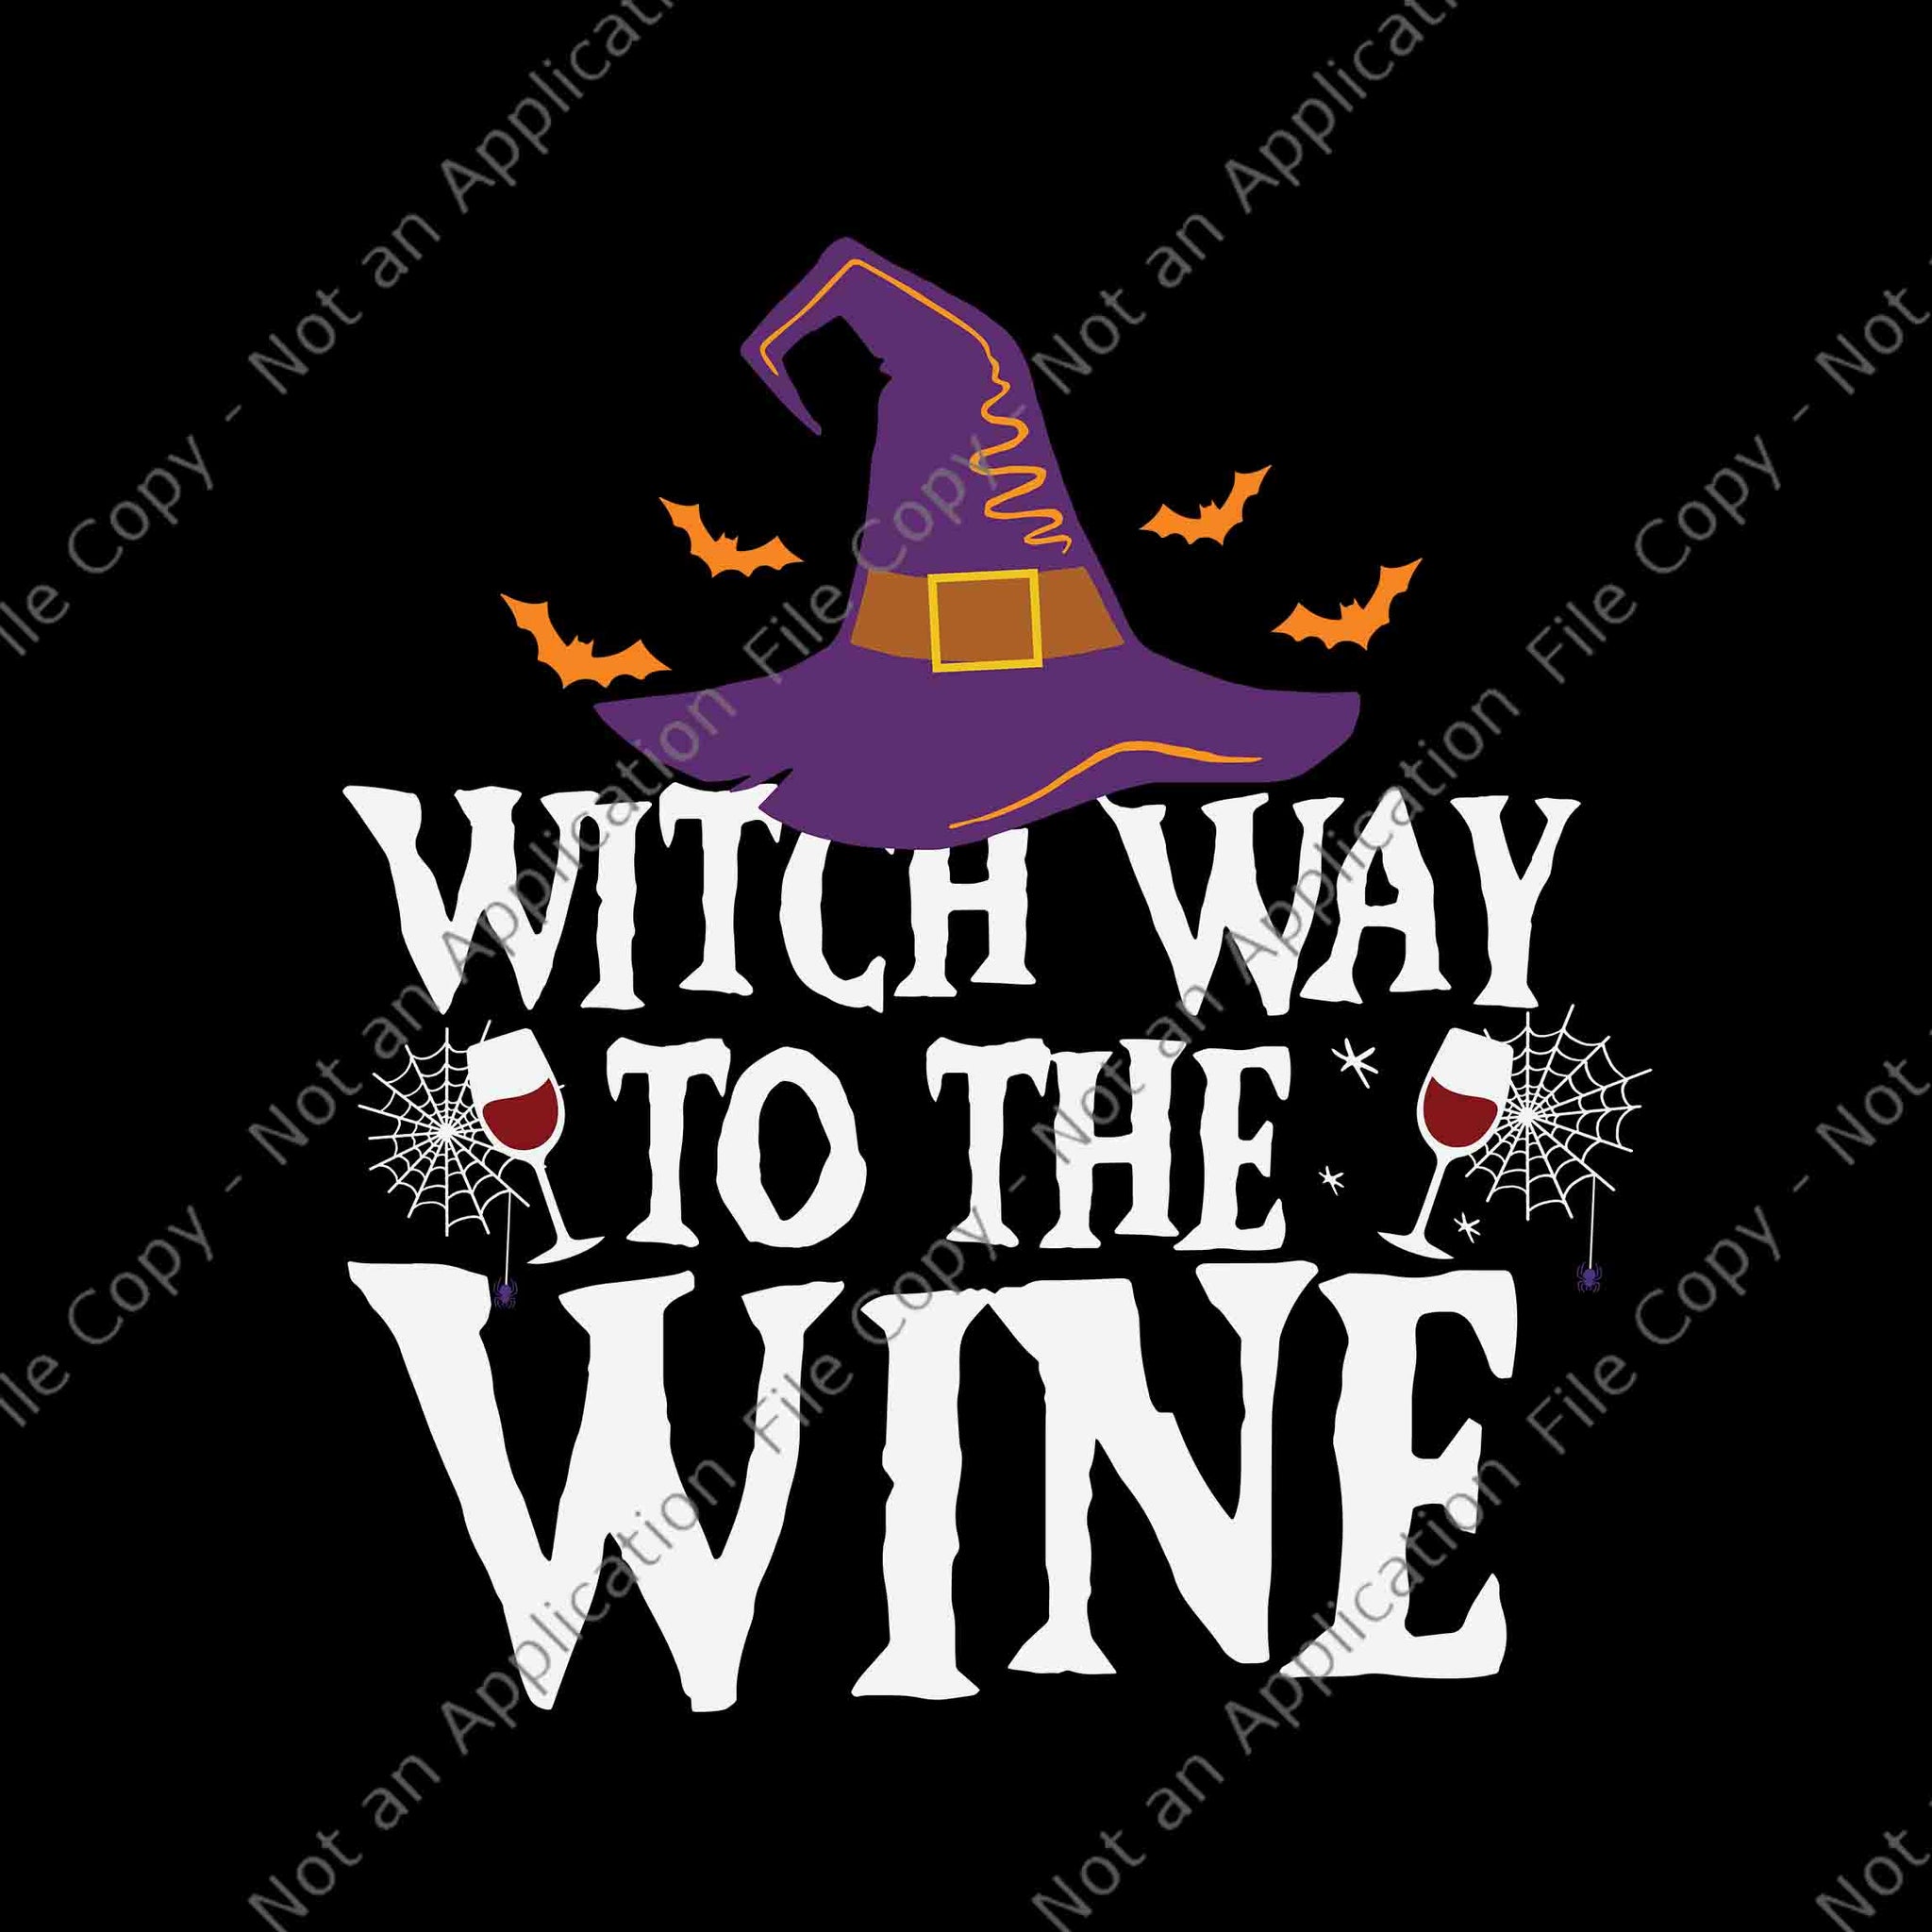 Witch Way To The Wine Svg, Halloween Witch Wine Svg, Witch Halloween Svg, Wine Svg